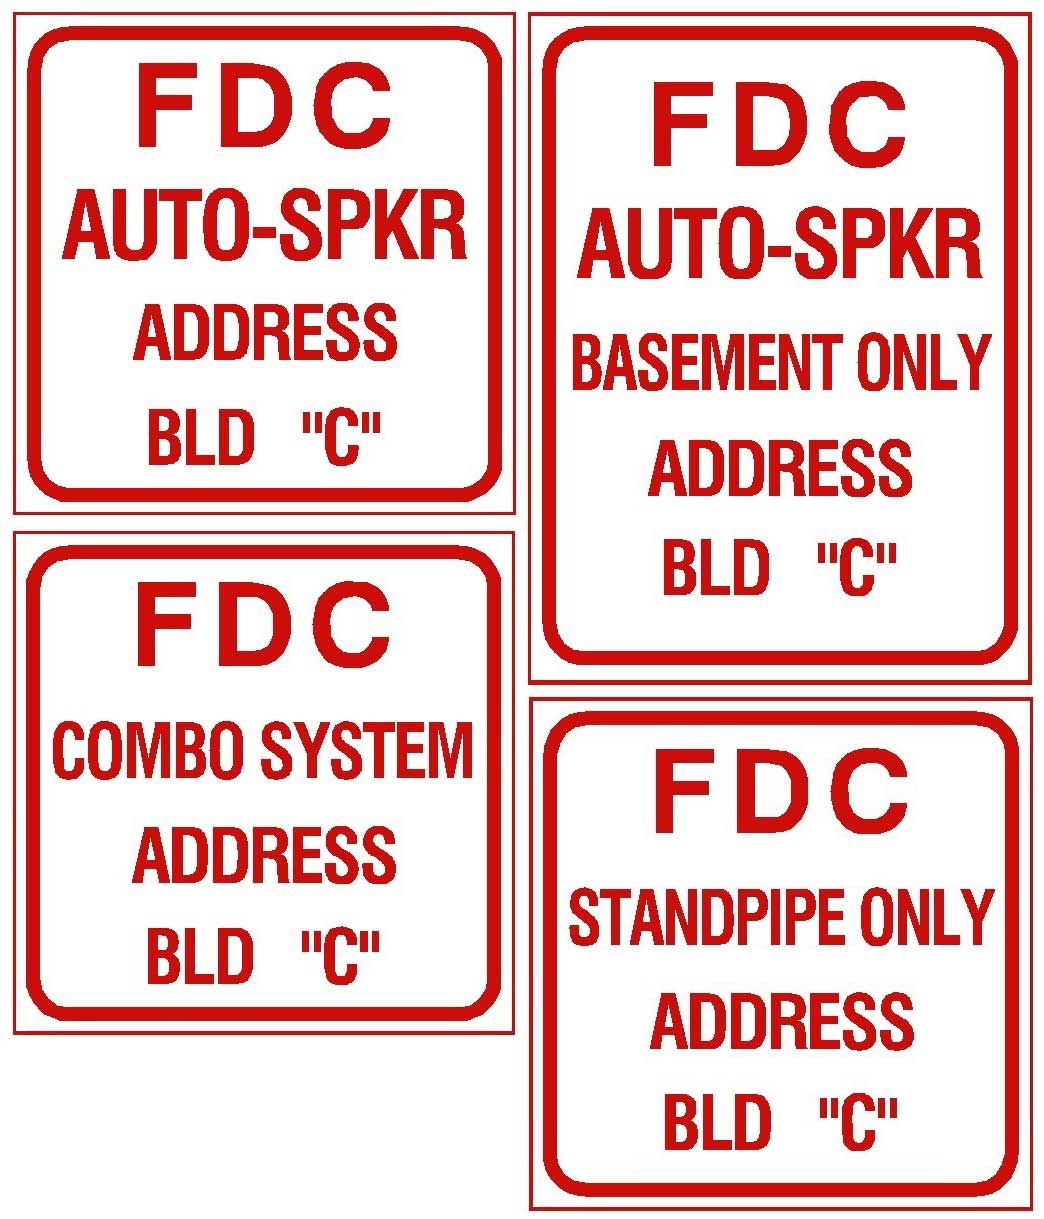 fdc signs2